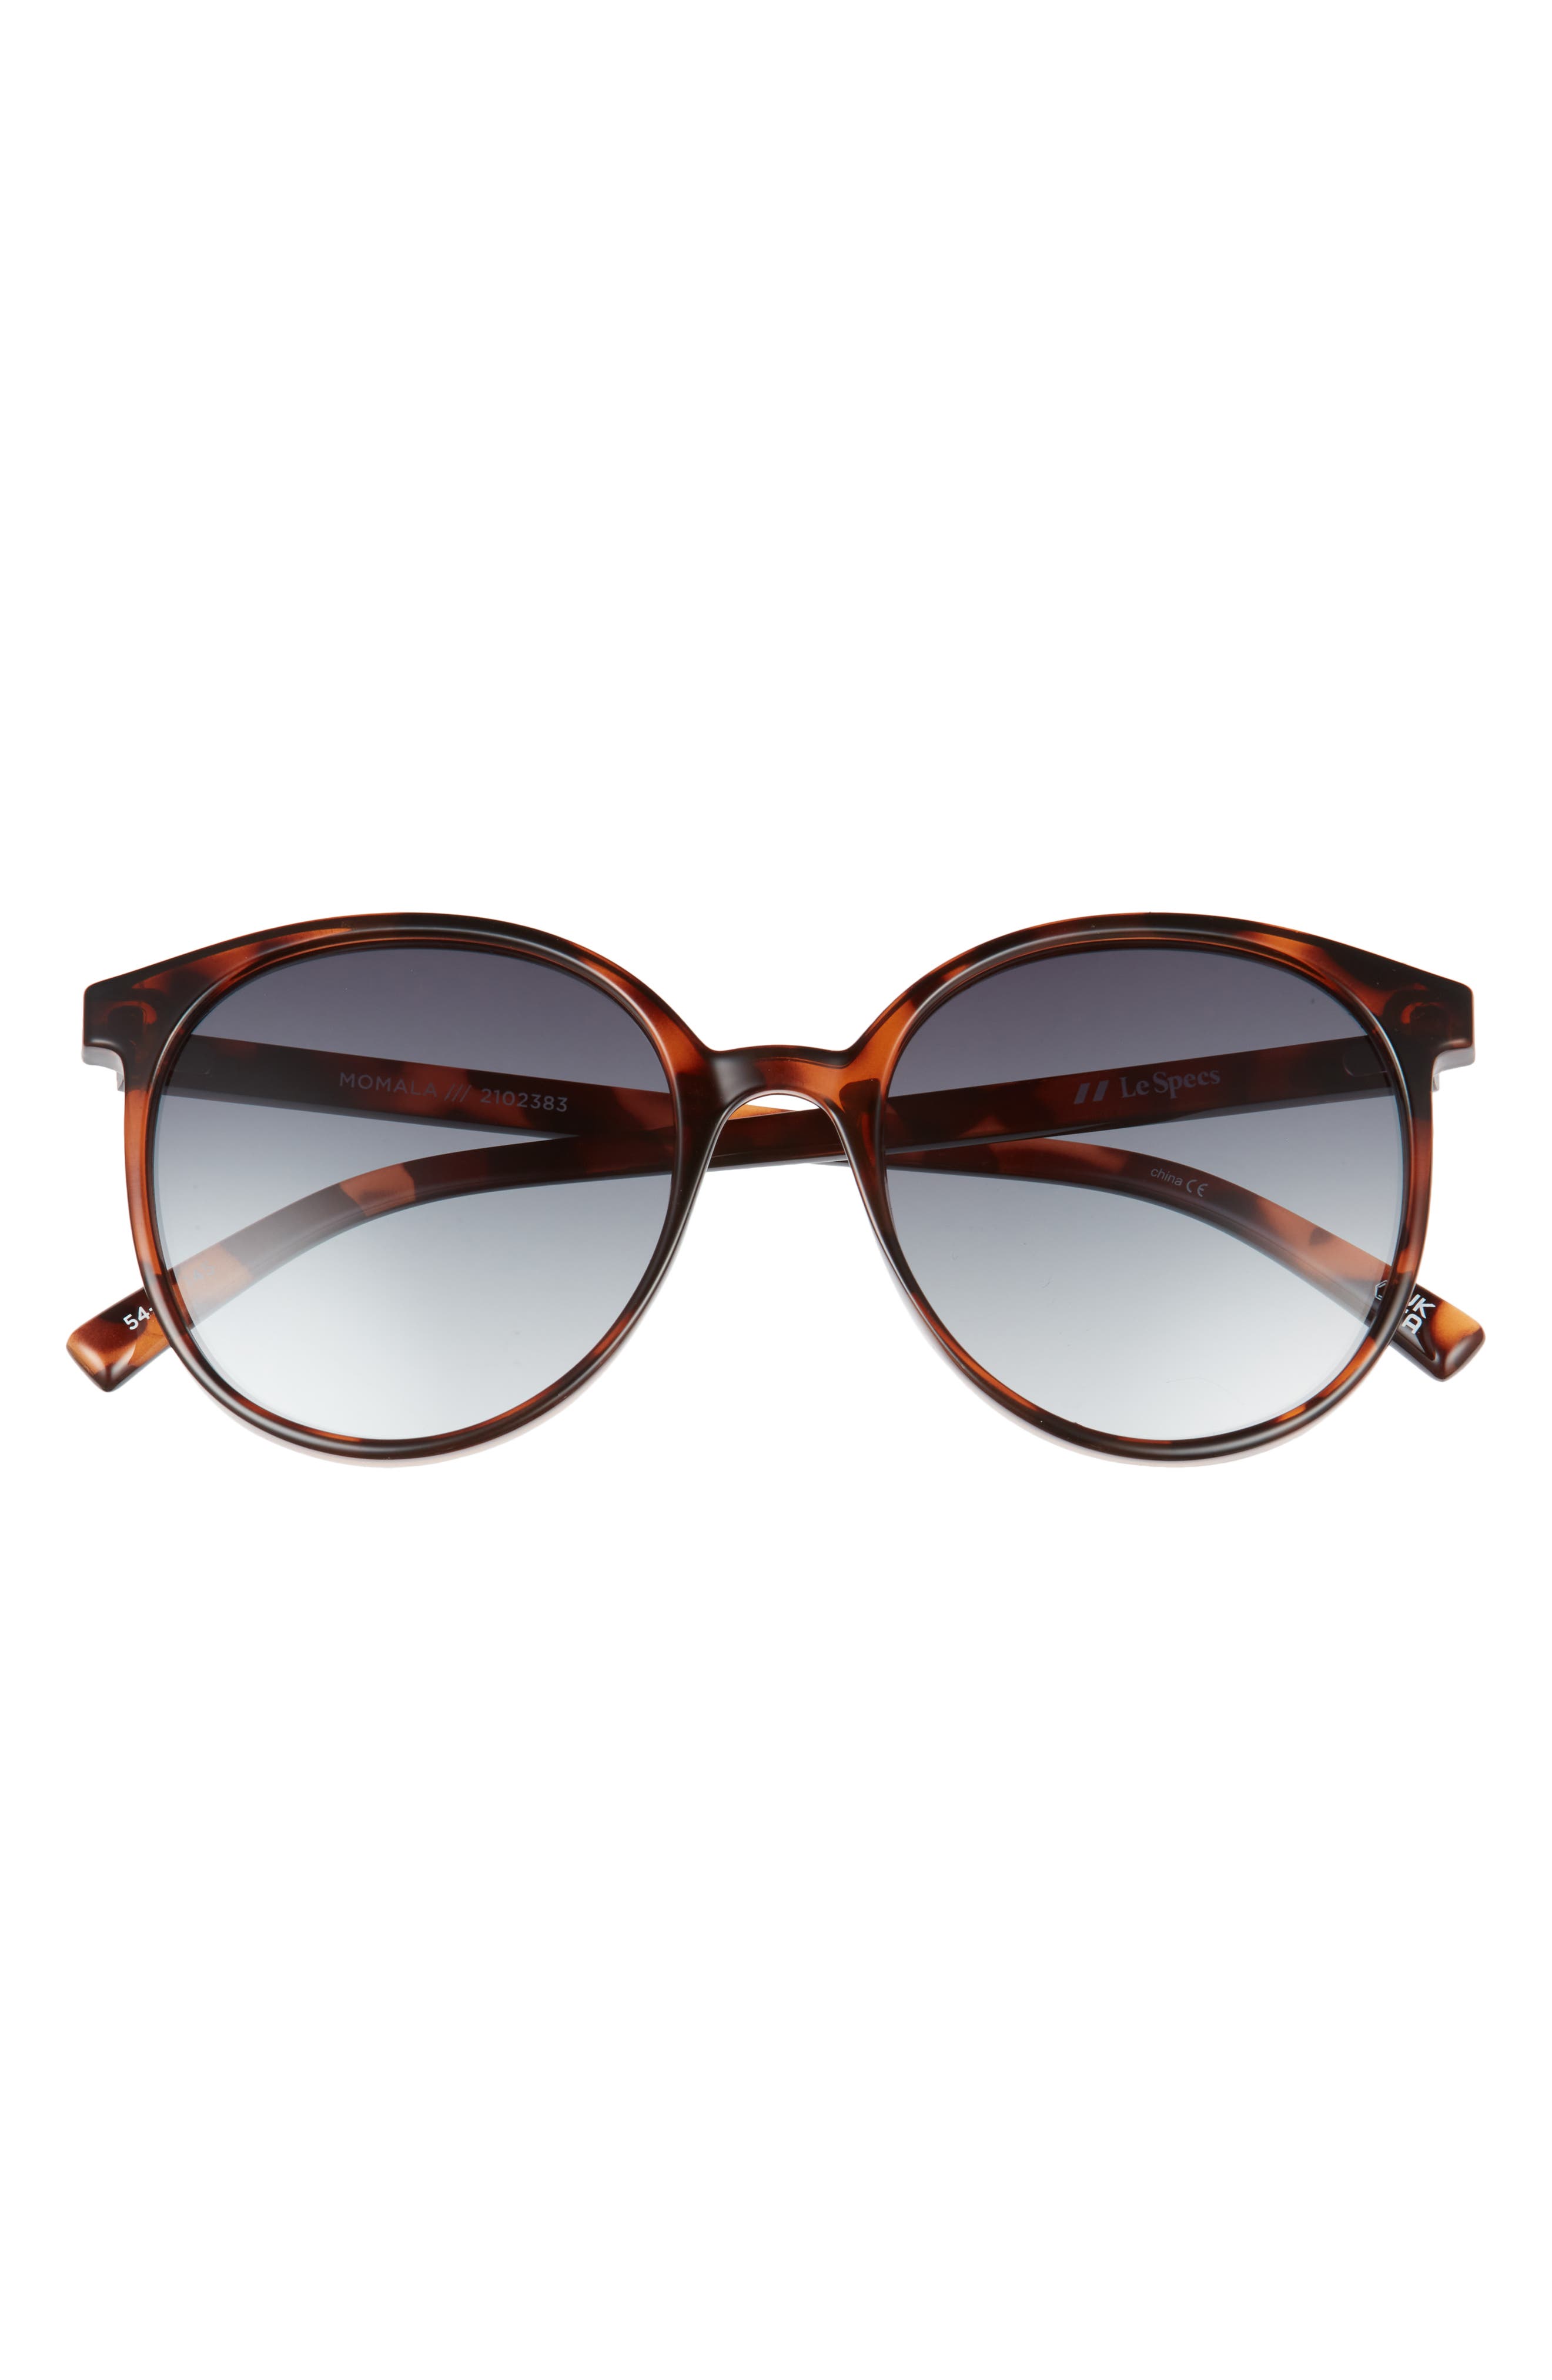 Le Specs Momala 54mm Round Sunglasses in Tort /Deep Smoke Grad at Nordstrom